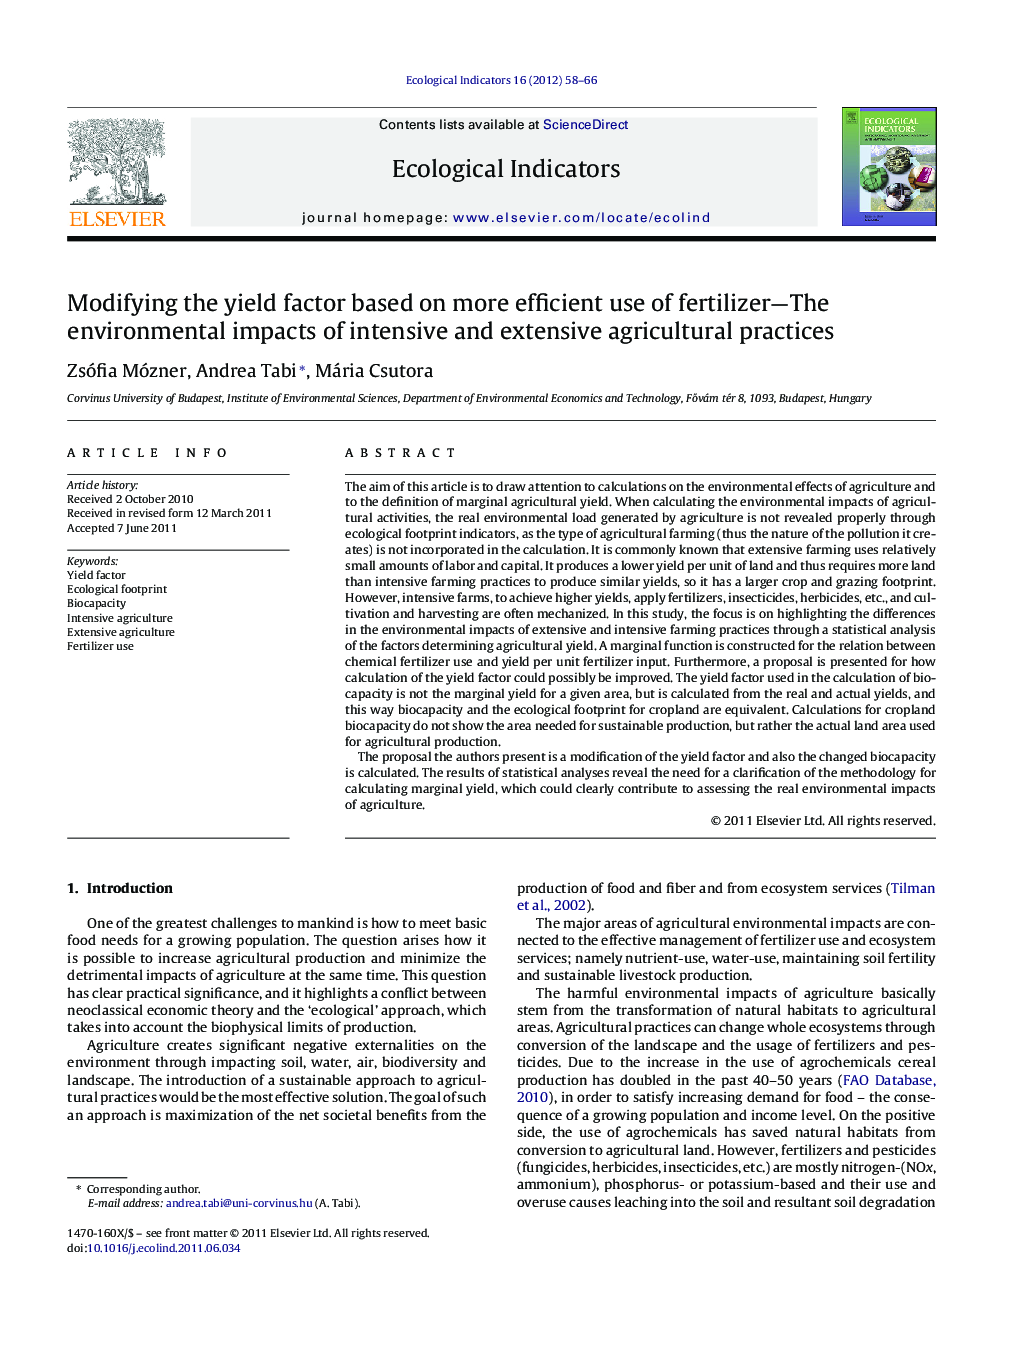 Modifying the yield factor based on more efficient use of fertilizer-The environmental impacts of intensive and extensive agricultural practices